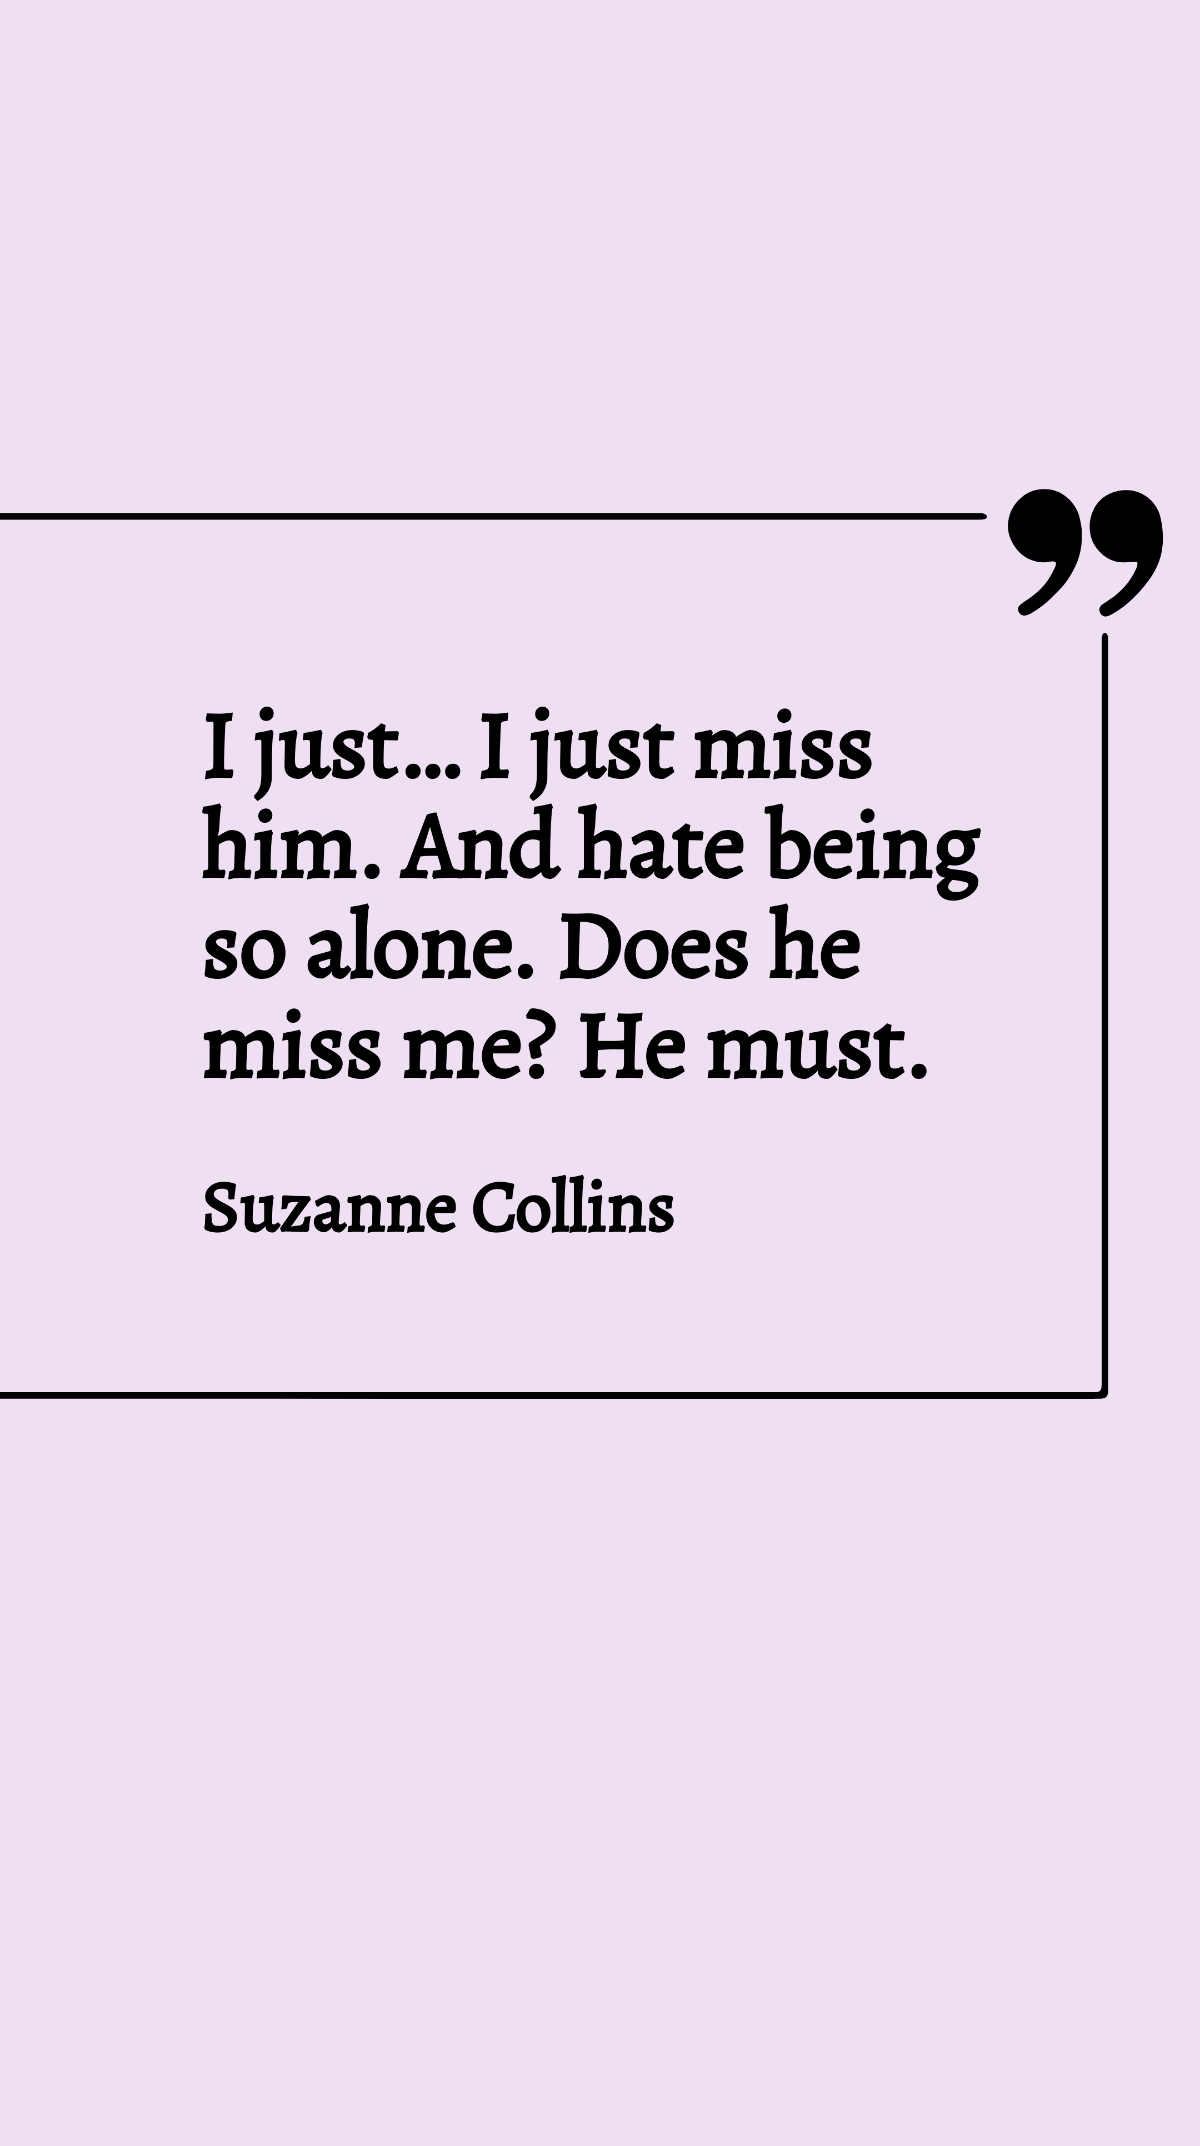 Free Suzanne Collins - I just… I just miss him. And hate being so alone. Does he miss me? He must. Template